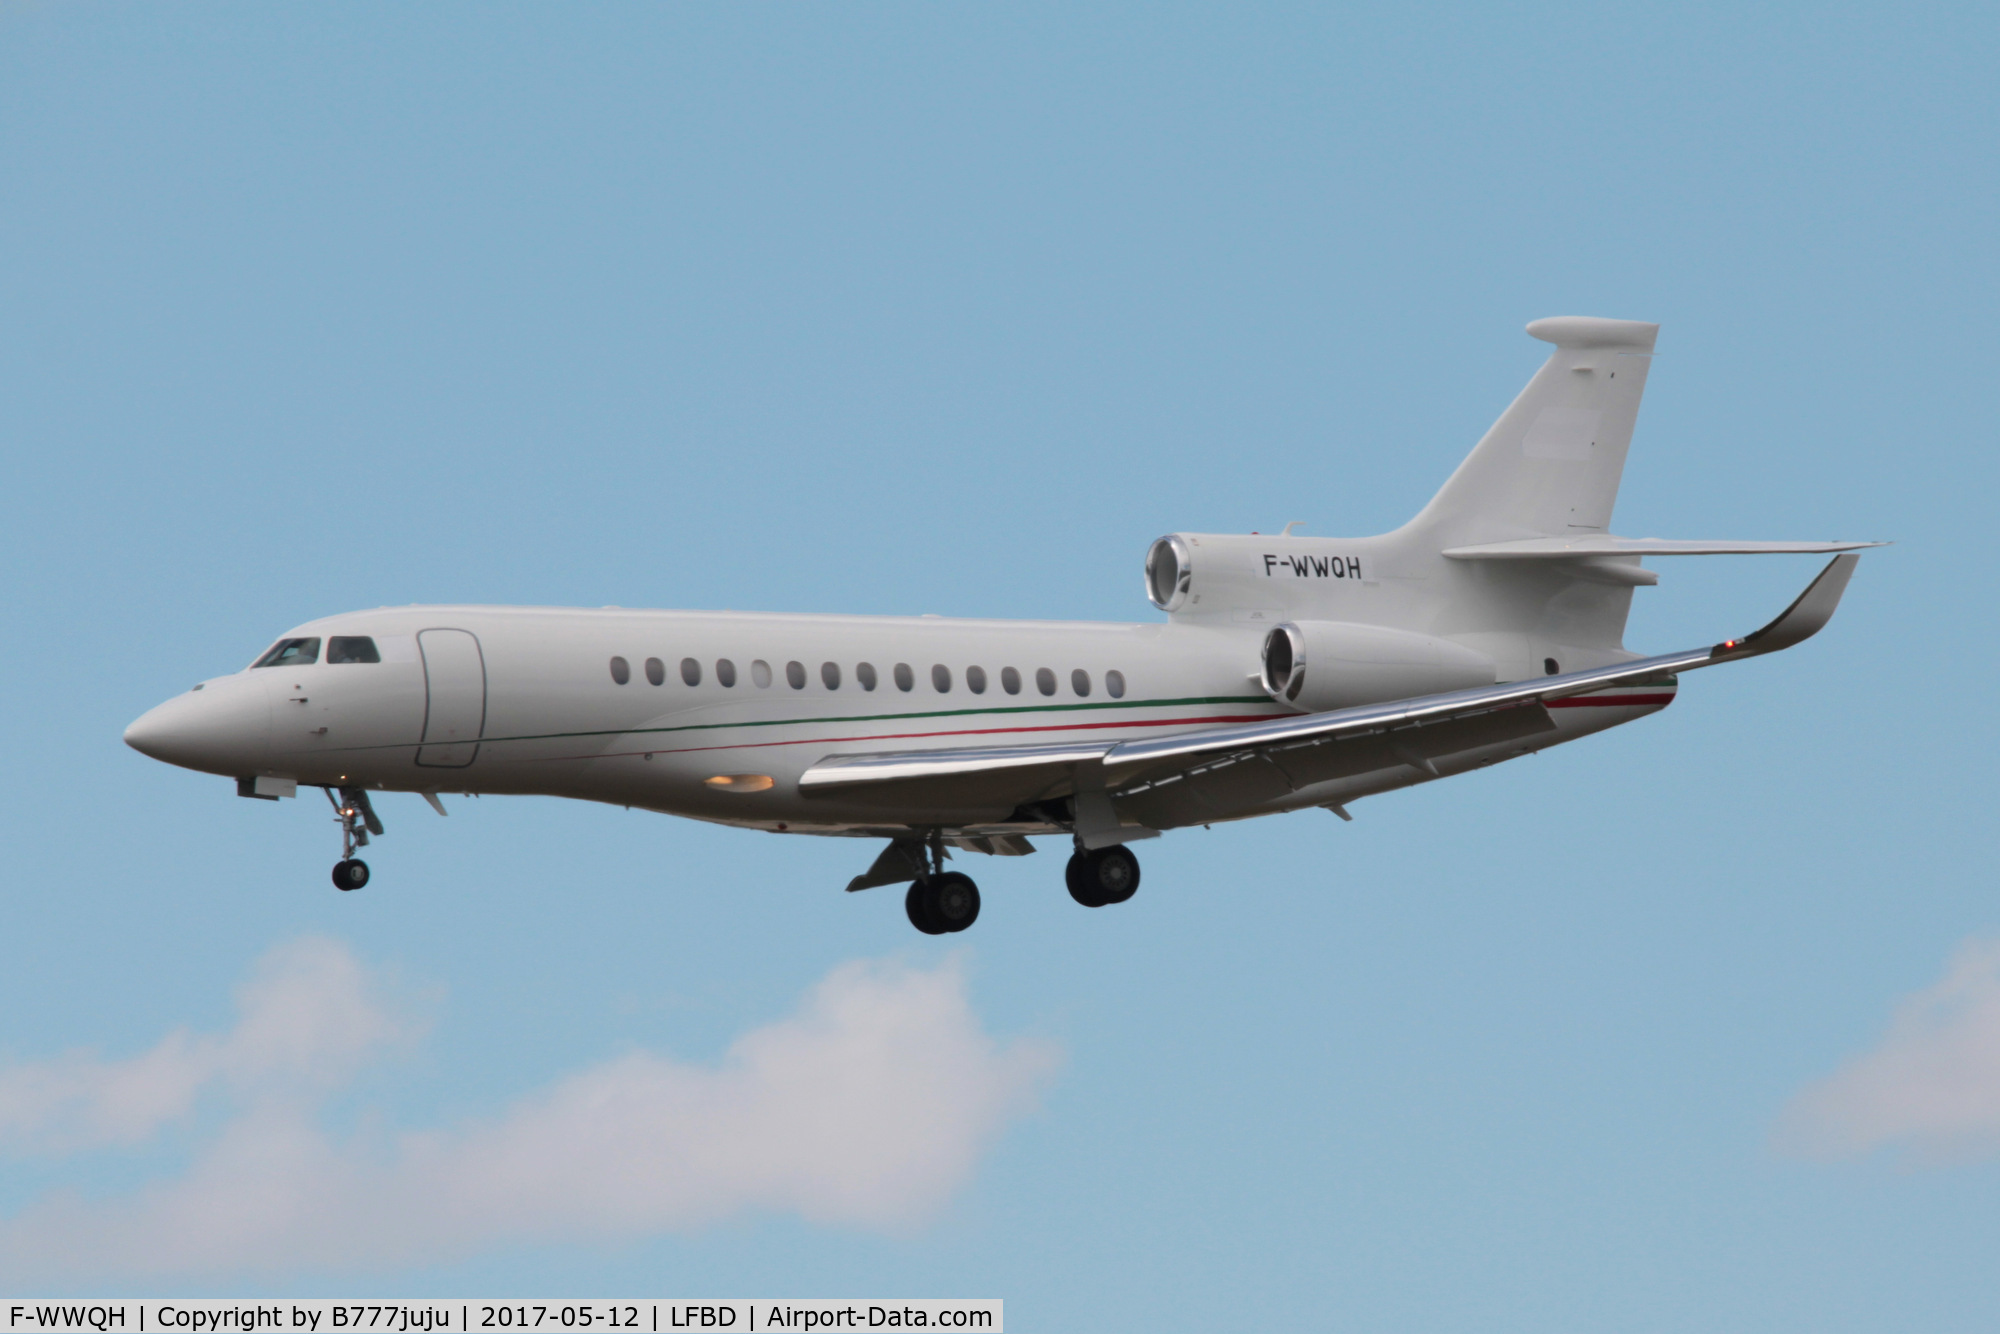 F-WWQH, 2017 Dassault Falcon 8X C/N 408, test flight before delivery